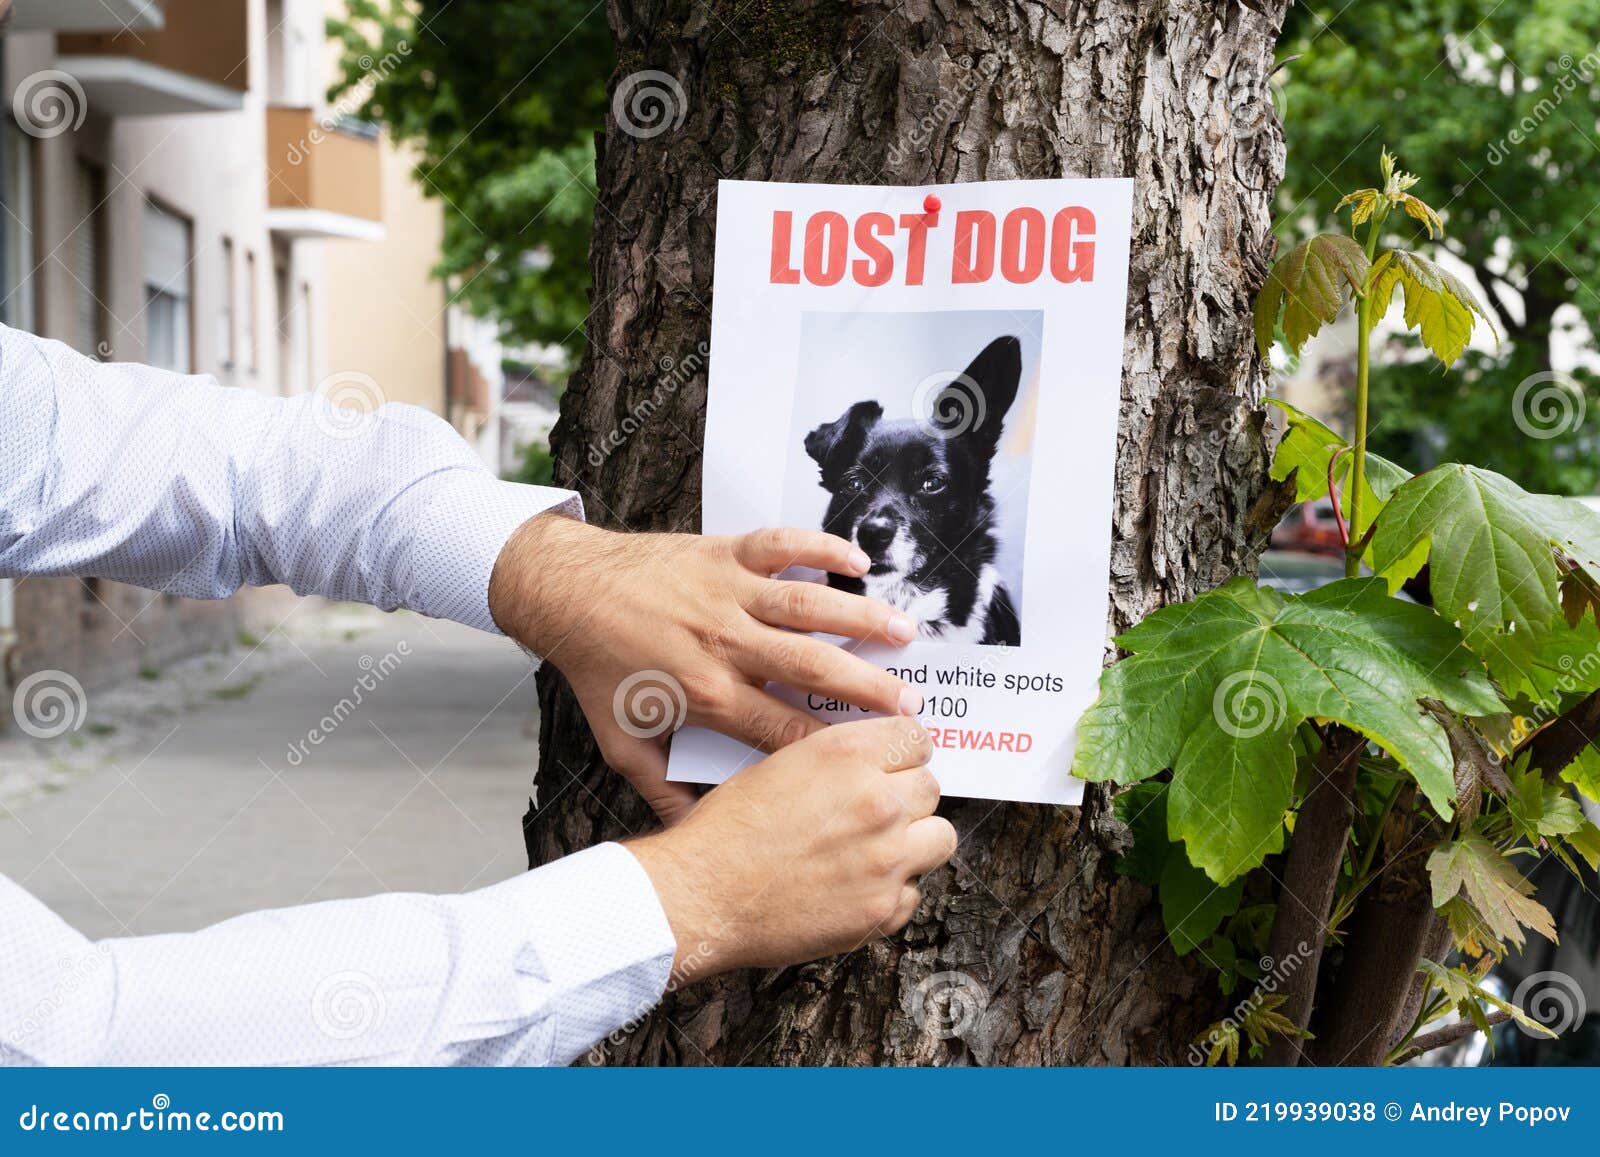 lost dog poster